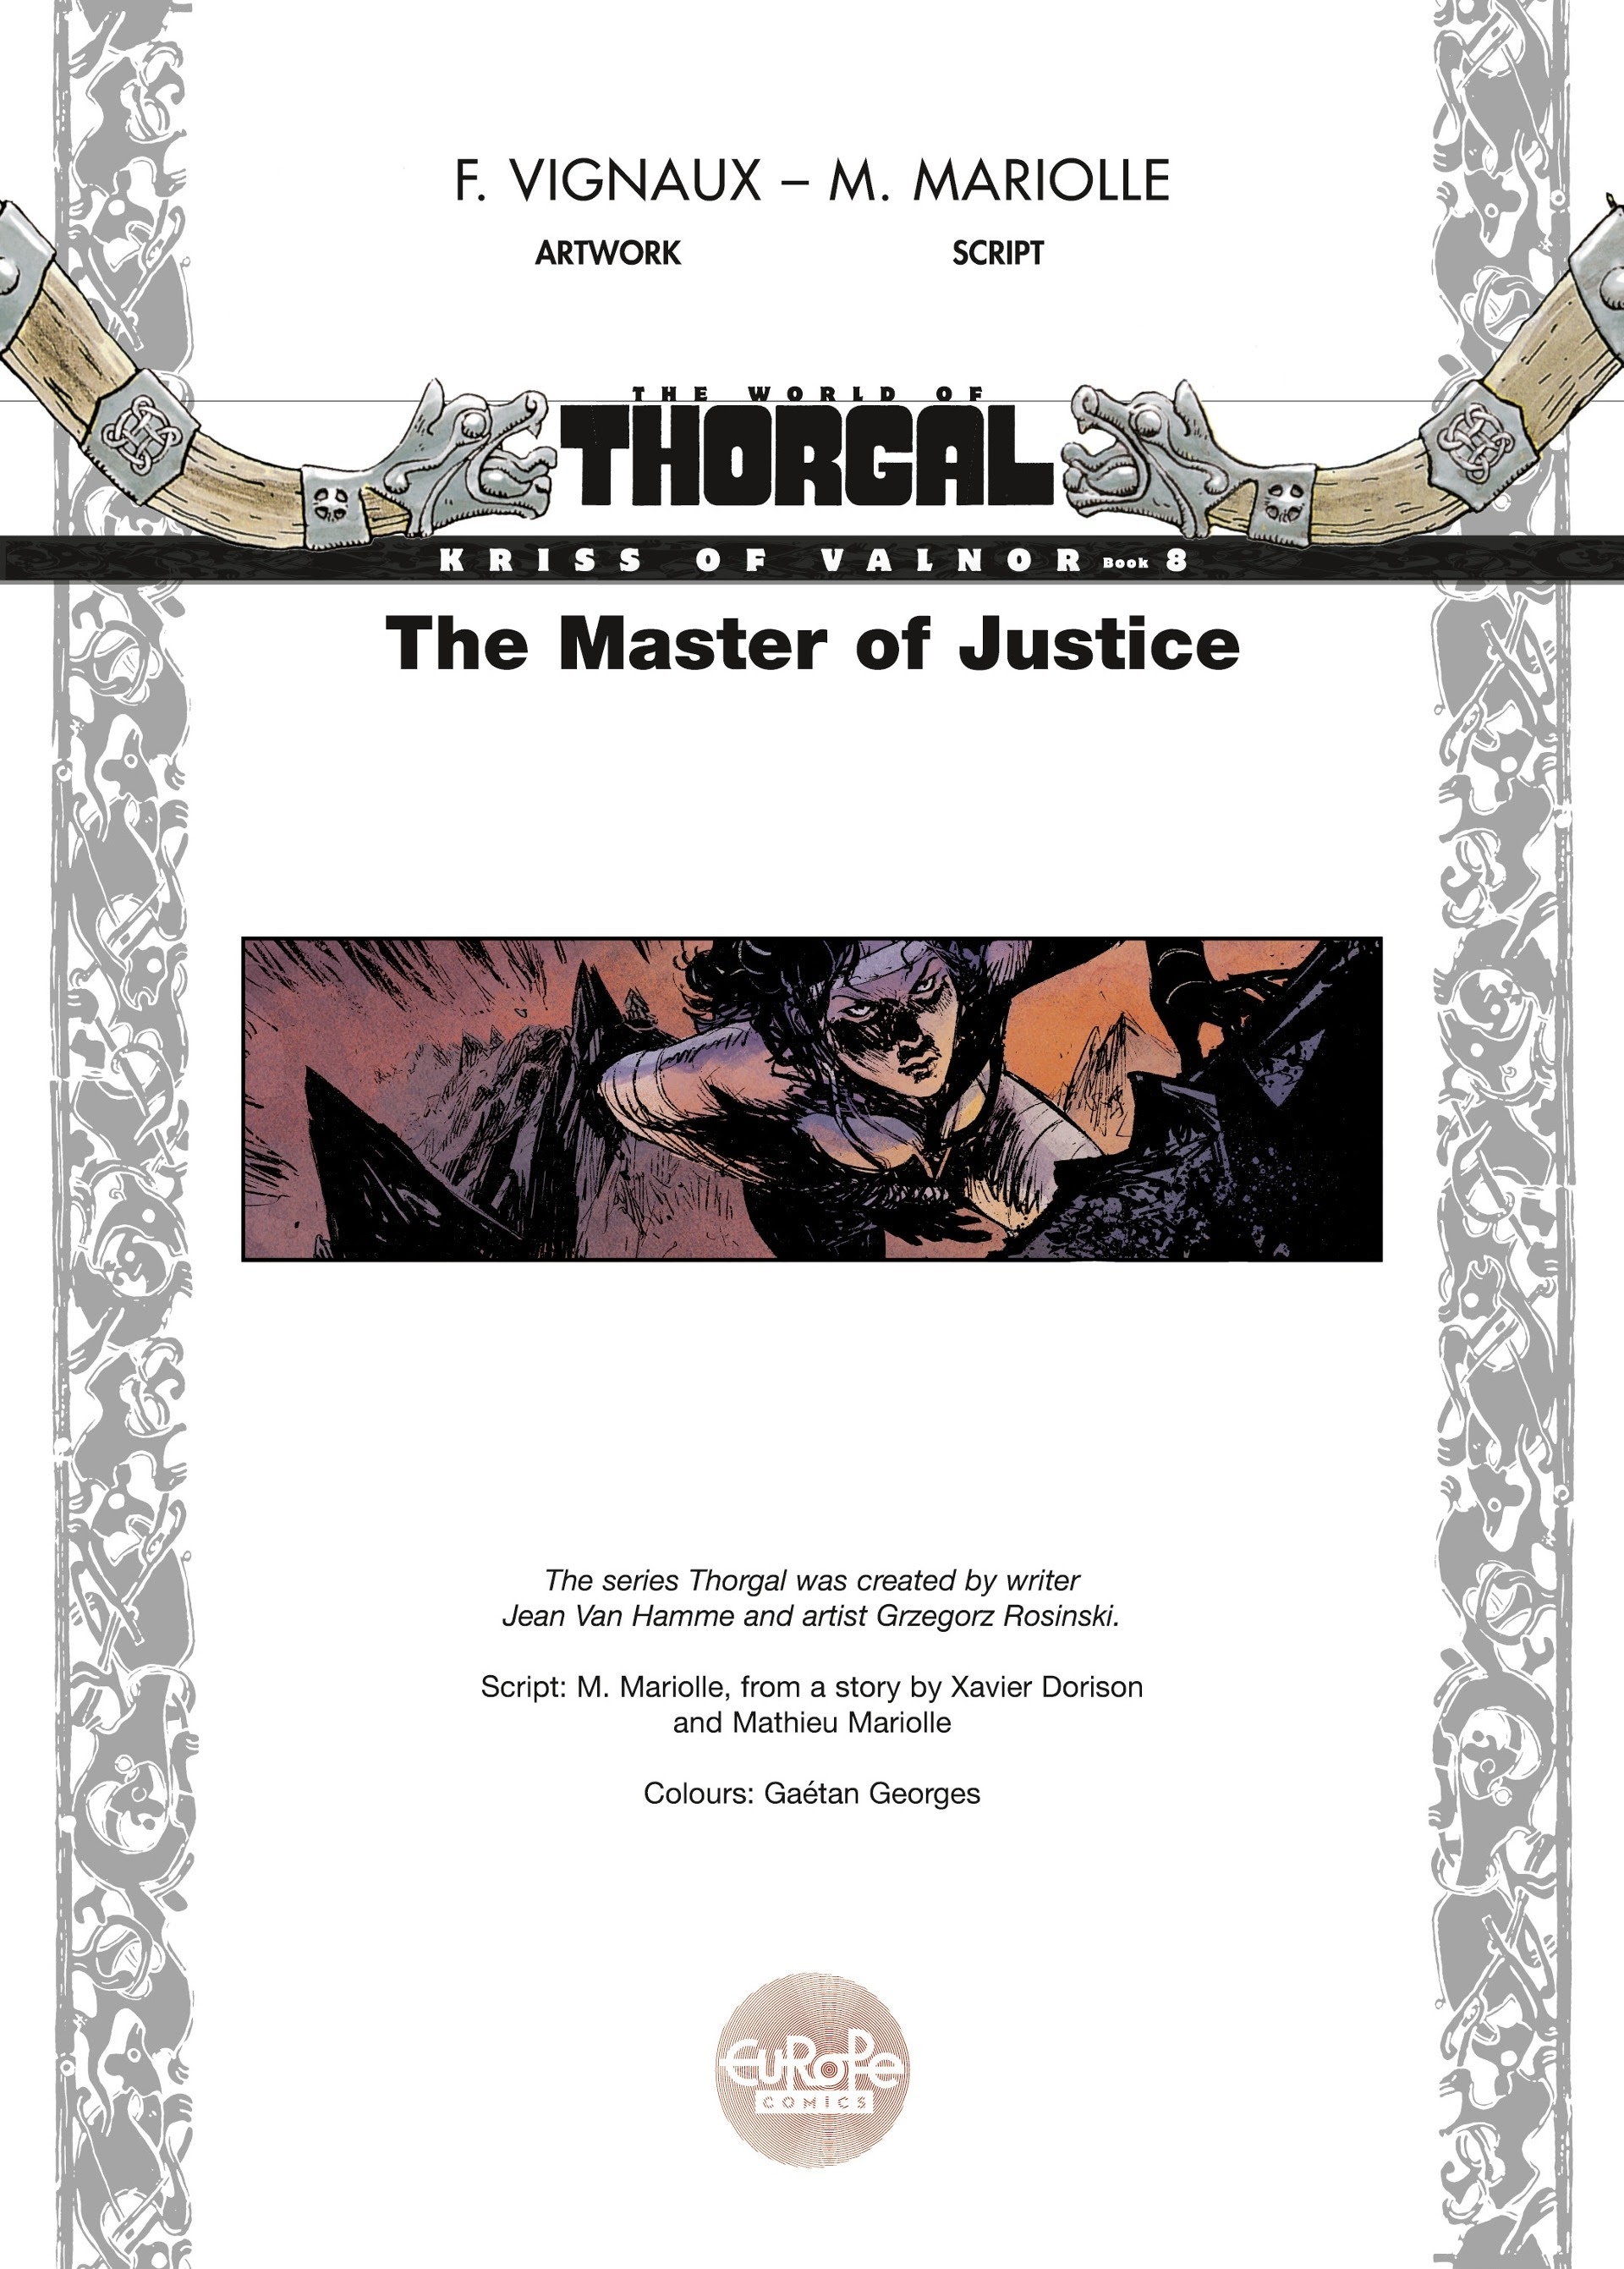 Read online Kriss of Valnor: The Master of Justice comic -  Issue # Full - 3